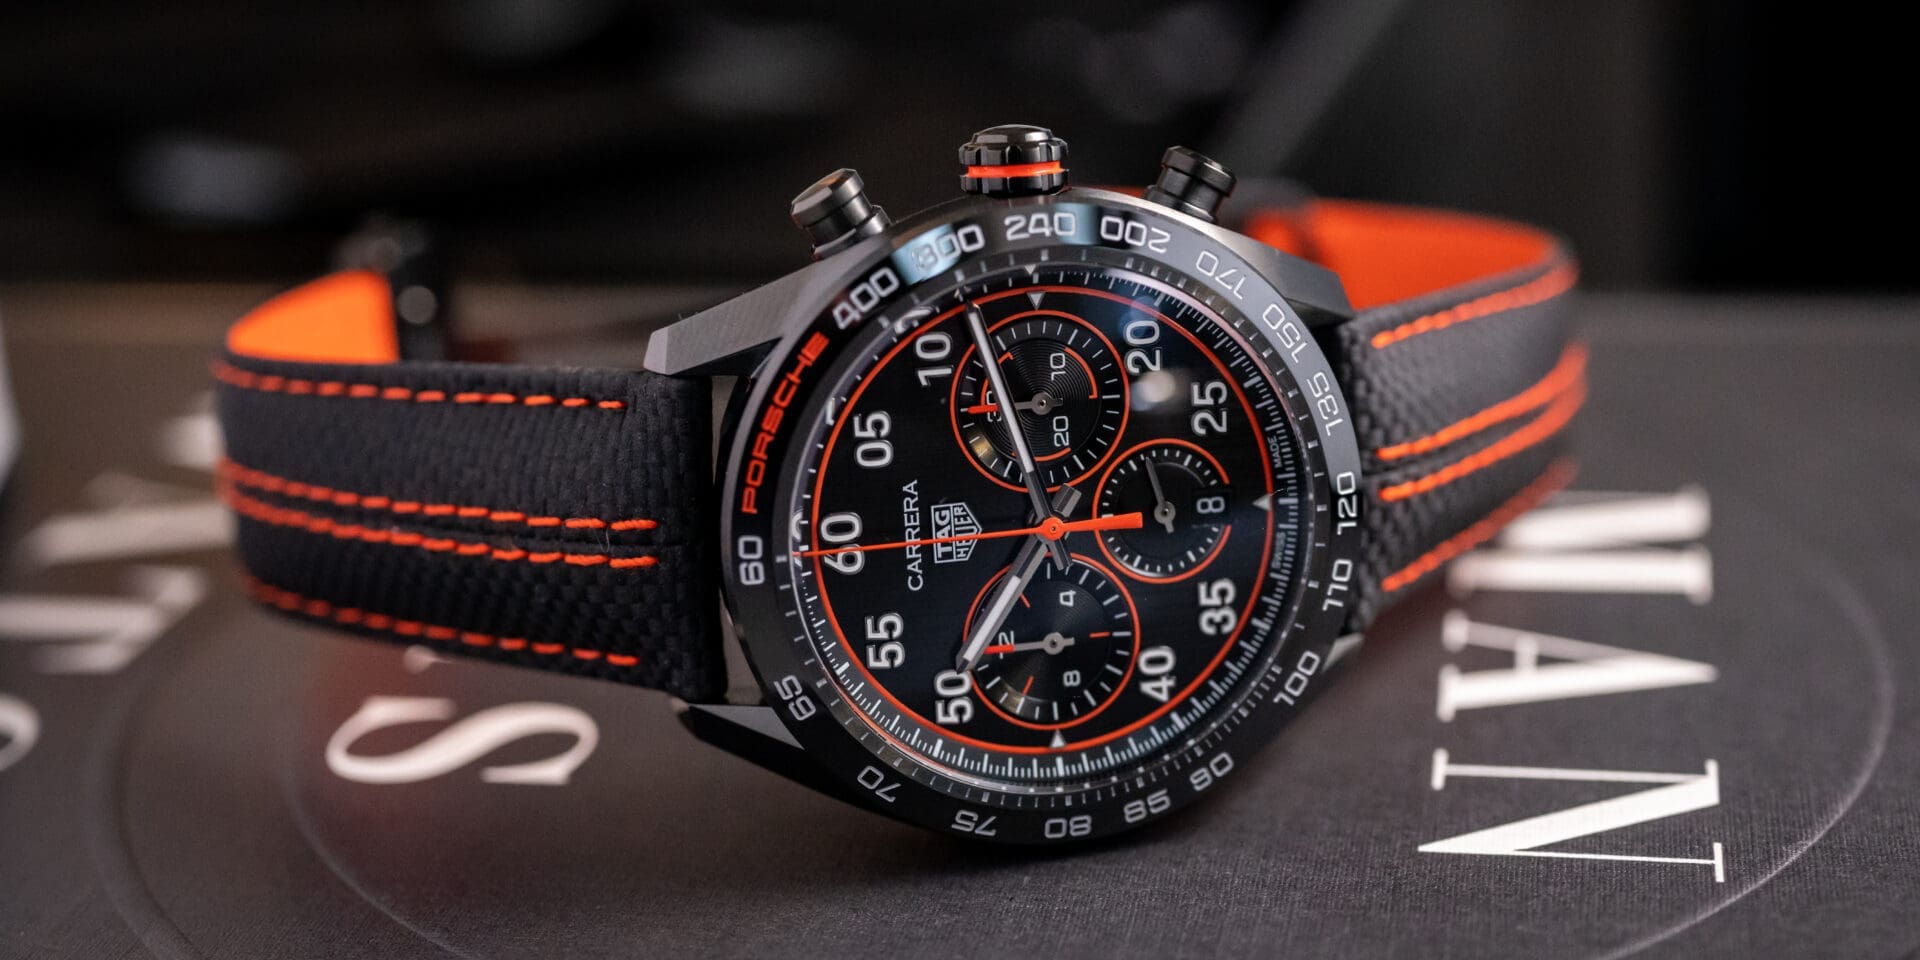 HANDS-ON: Withstand the heat with the new TAG Heuer Carrera x Porsche Orange Racing